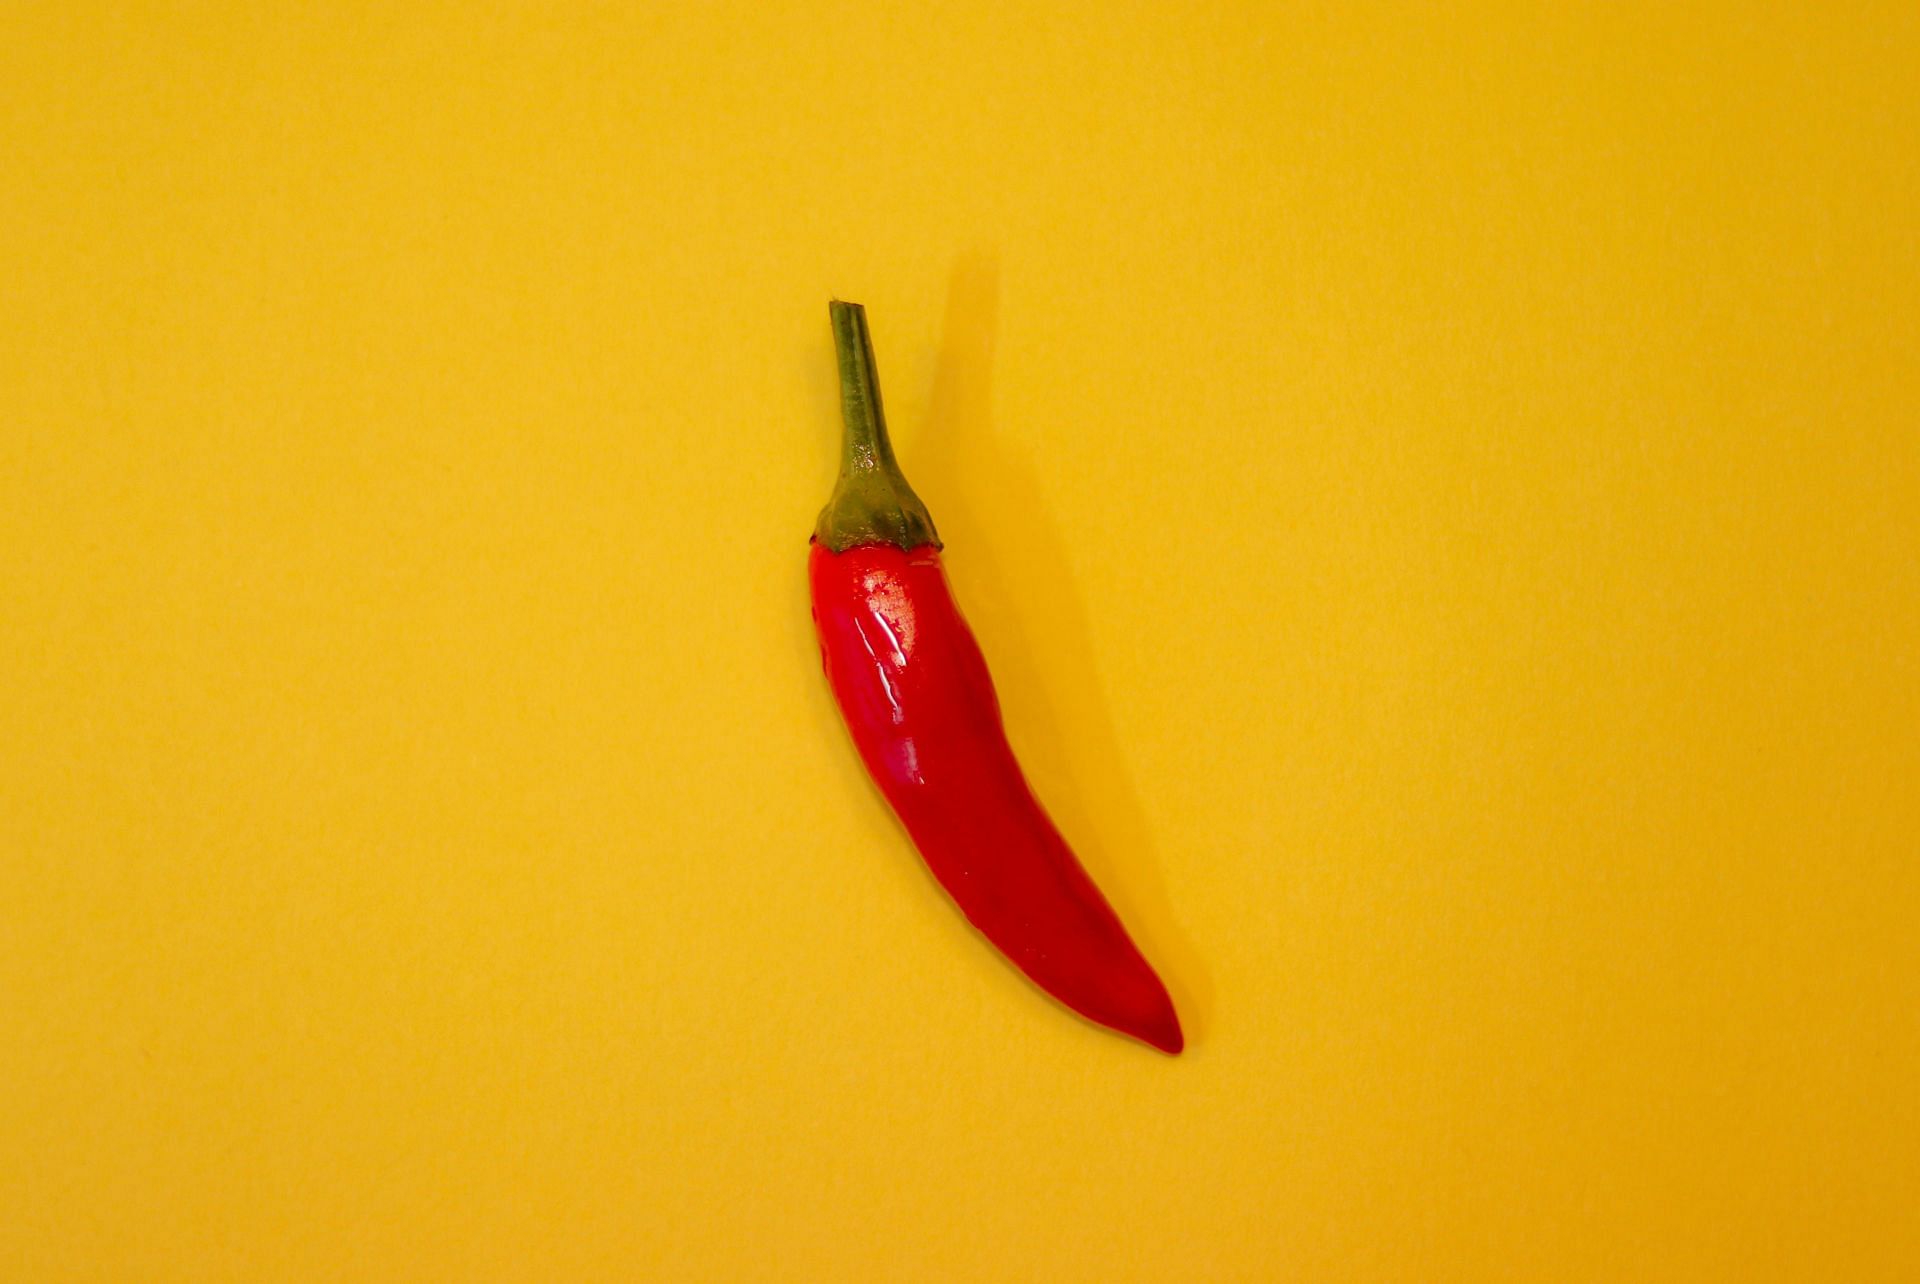 Natural remedies for stomach ulcers: Benefits of adding chilli peppers to your diet (image sourced via Pexels / Photo by Tom)